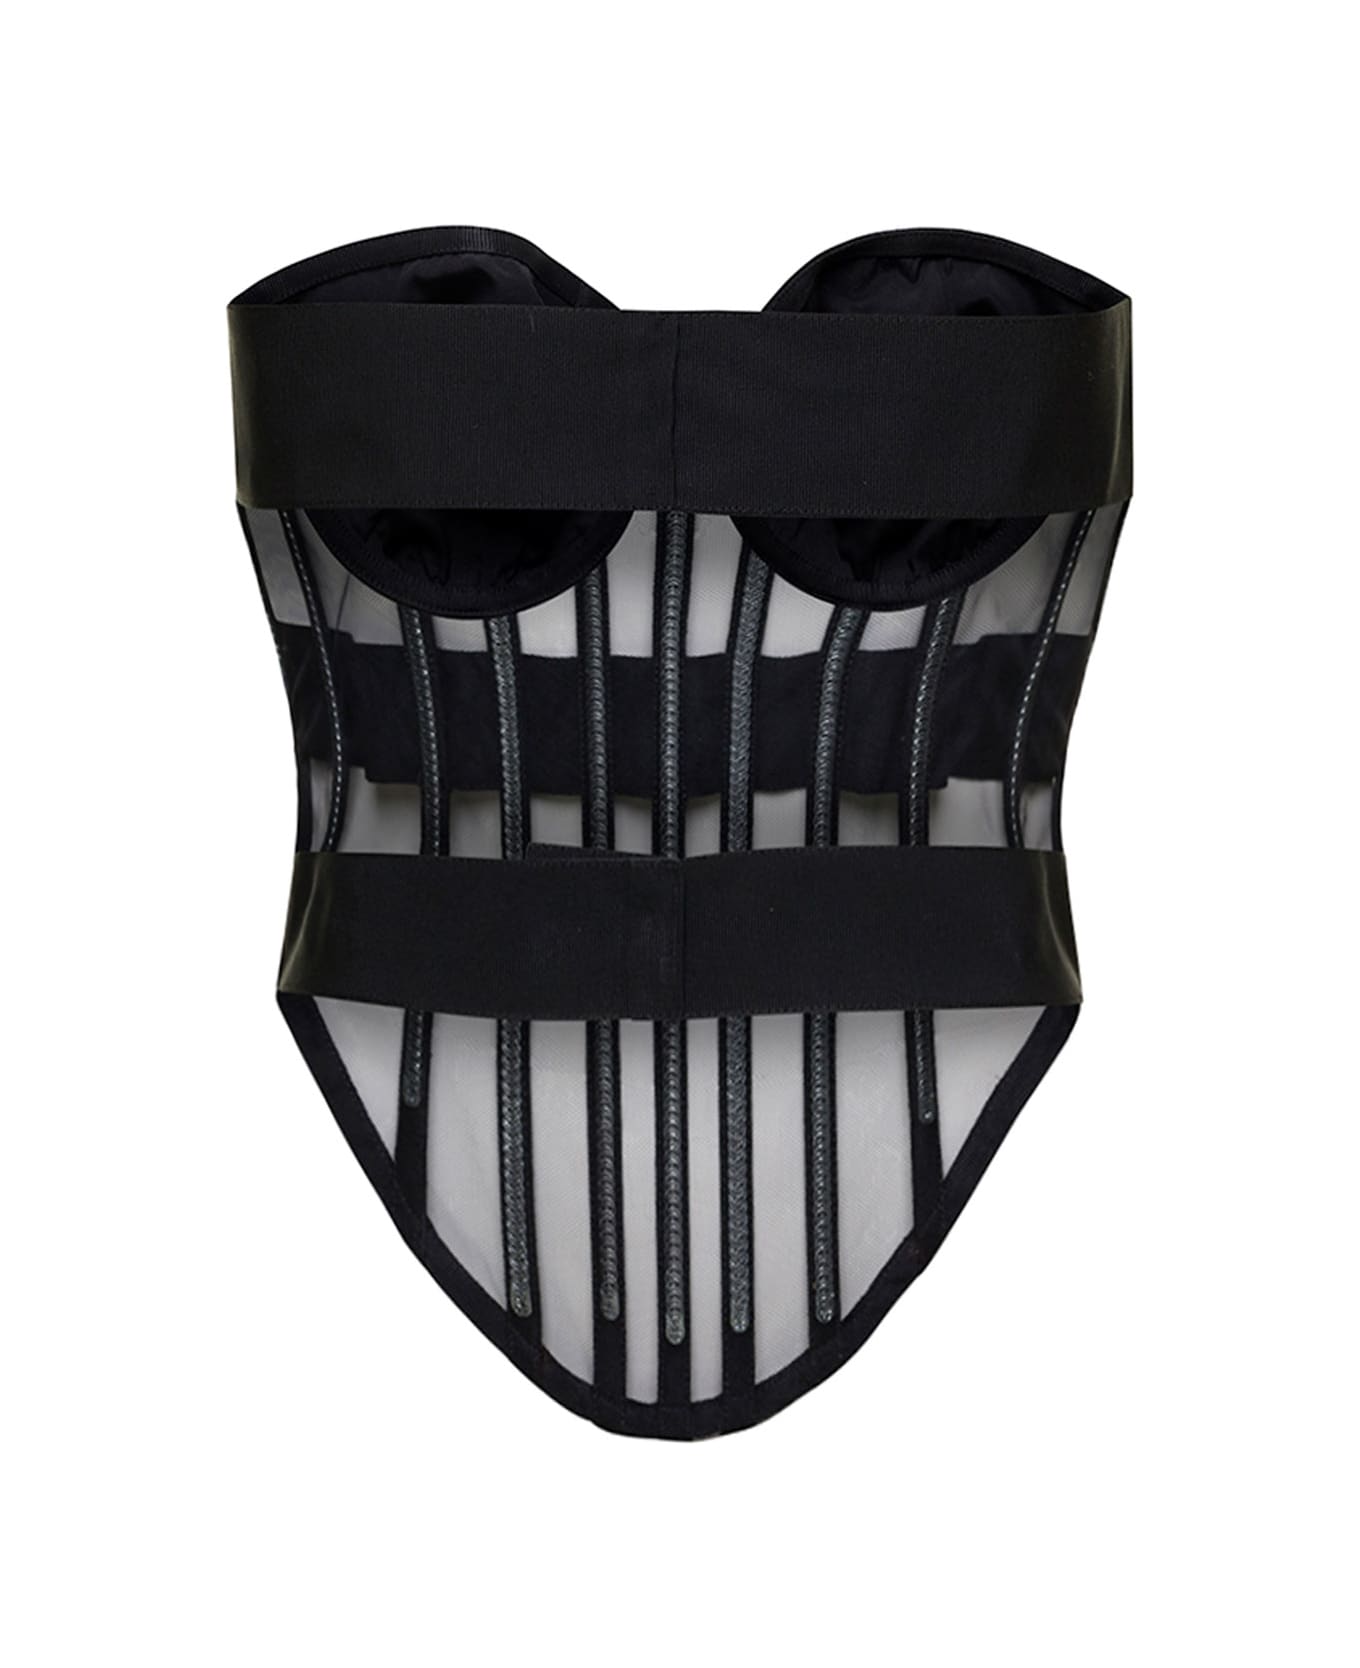 Dolce & Gabbana Black Corset Top With Boning And Sweetheart Neckline In Polyamide Woman - Black